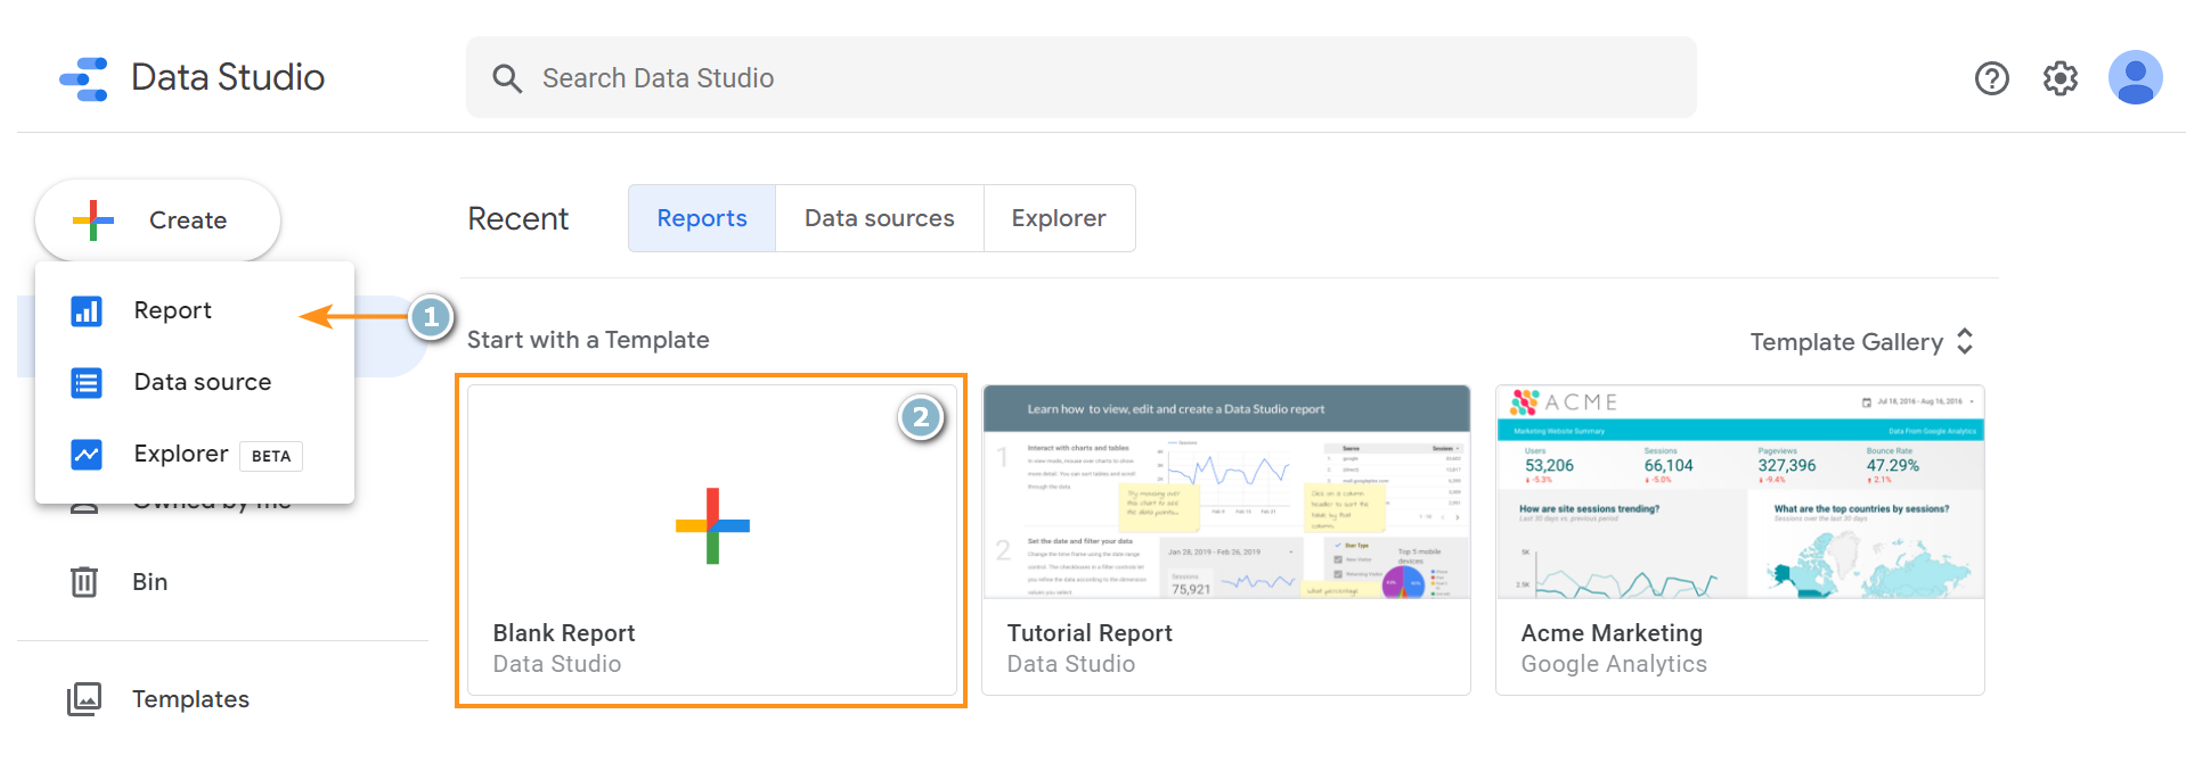 2. How to create a blank report on Google Data Studio